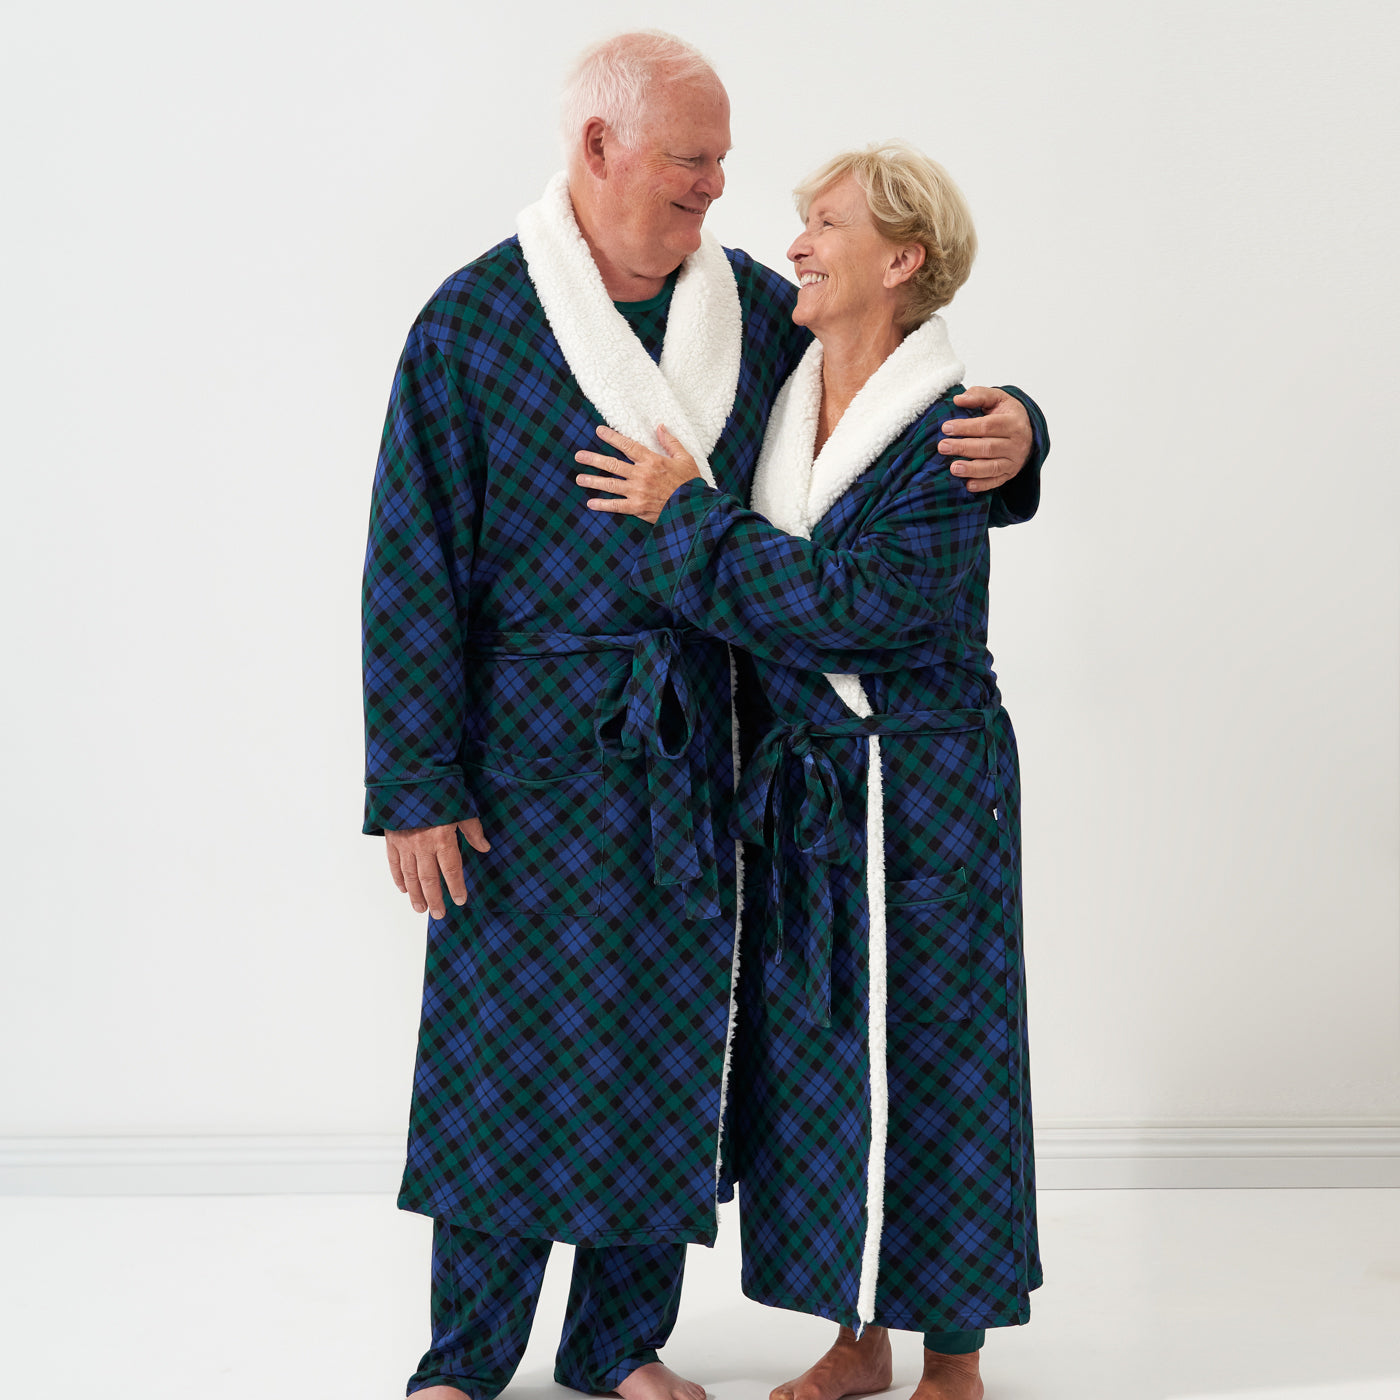 Alternate image of a man and woman wearing Emerald Plaid cozy robes